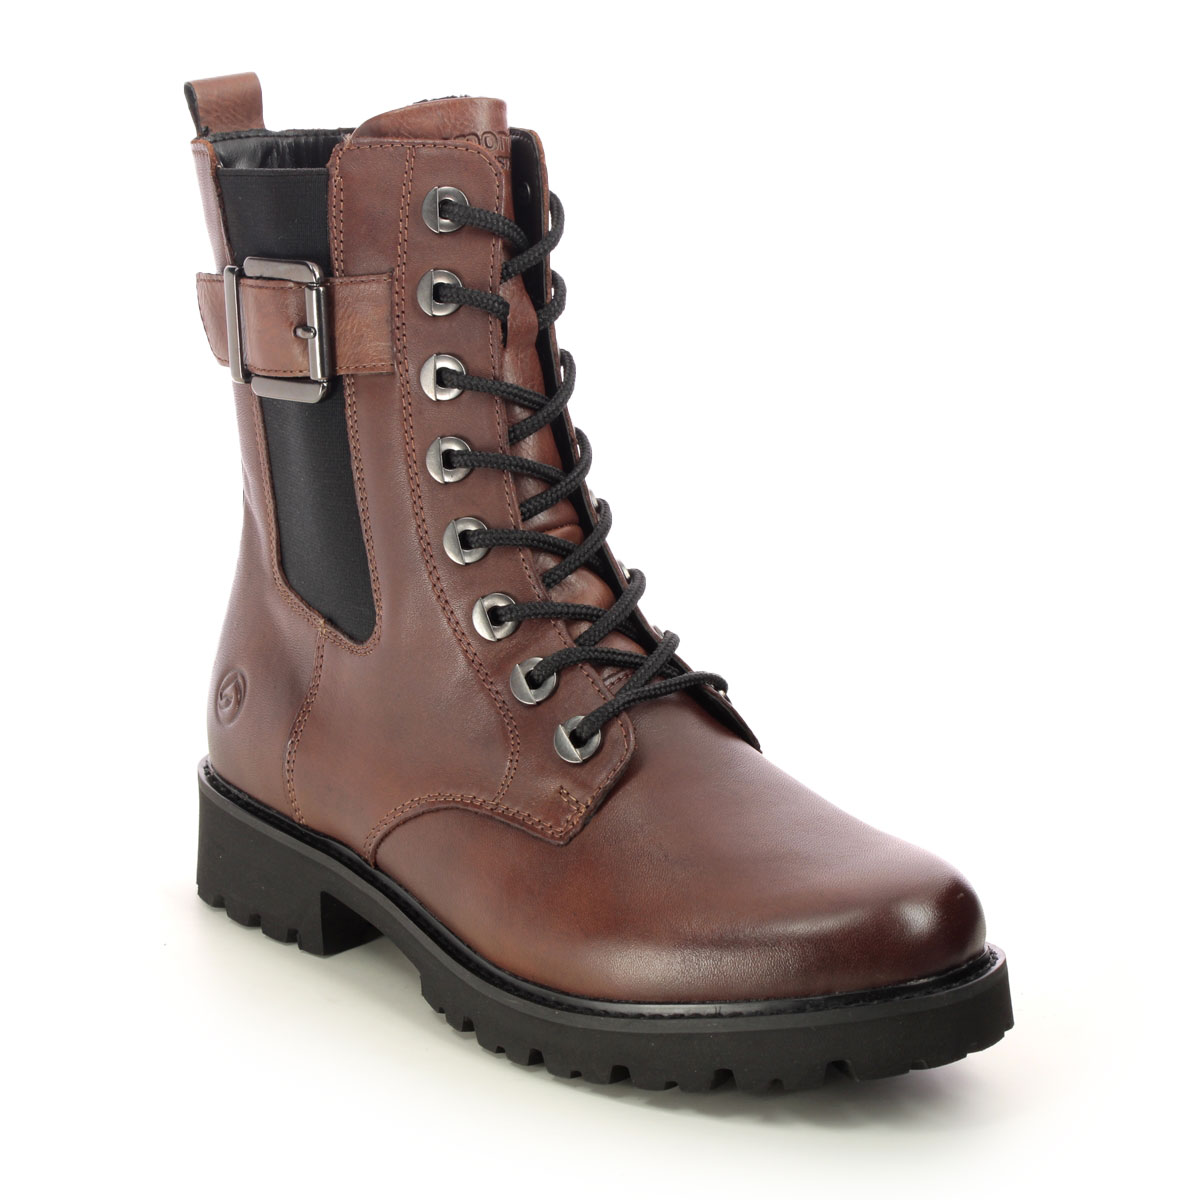 Remonte Doclachel Elle Brown Leather Womens Biker Boots D8668-22 In Size 41 In Plain Brown Leather